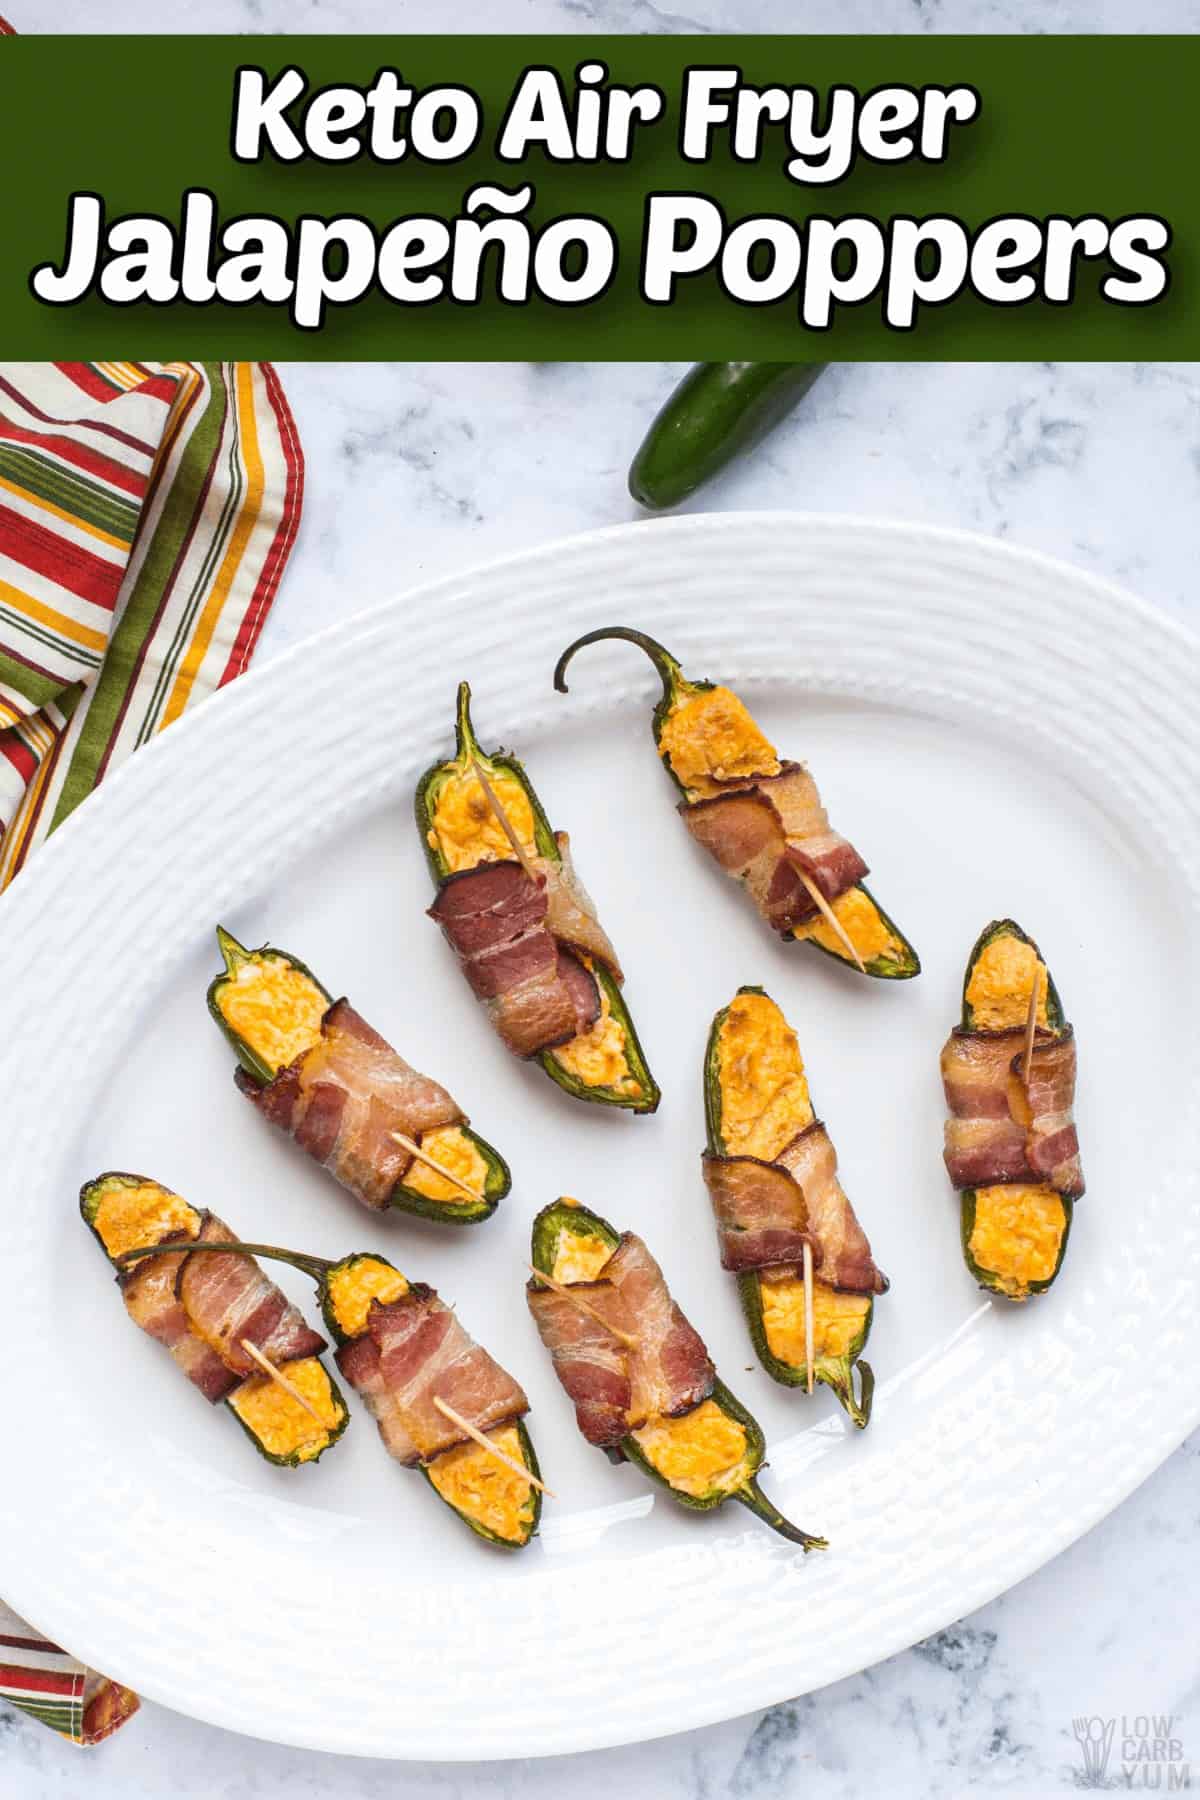 keto air fryer jalapeno poppers pintrest image 